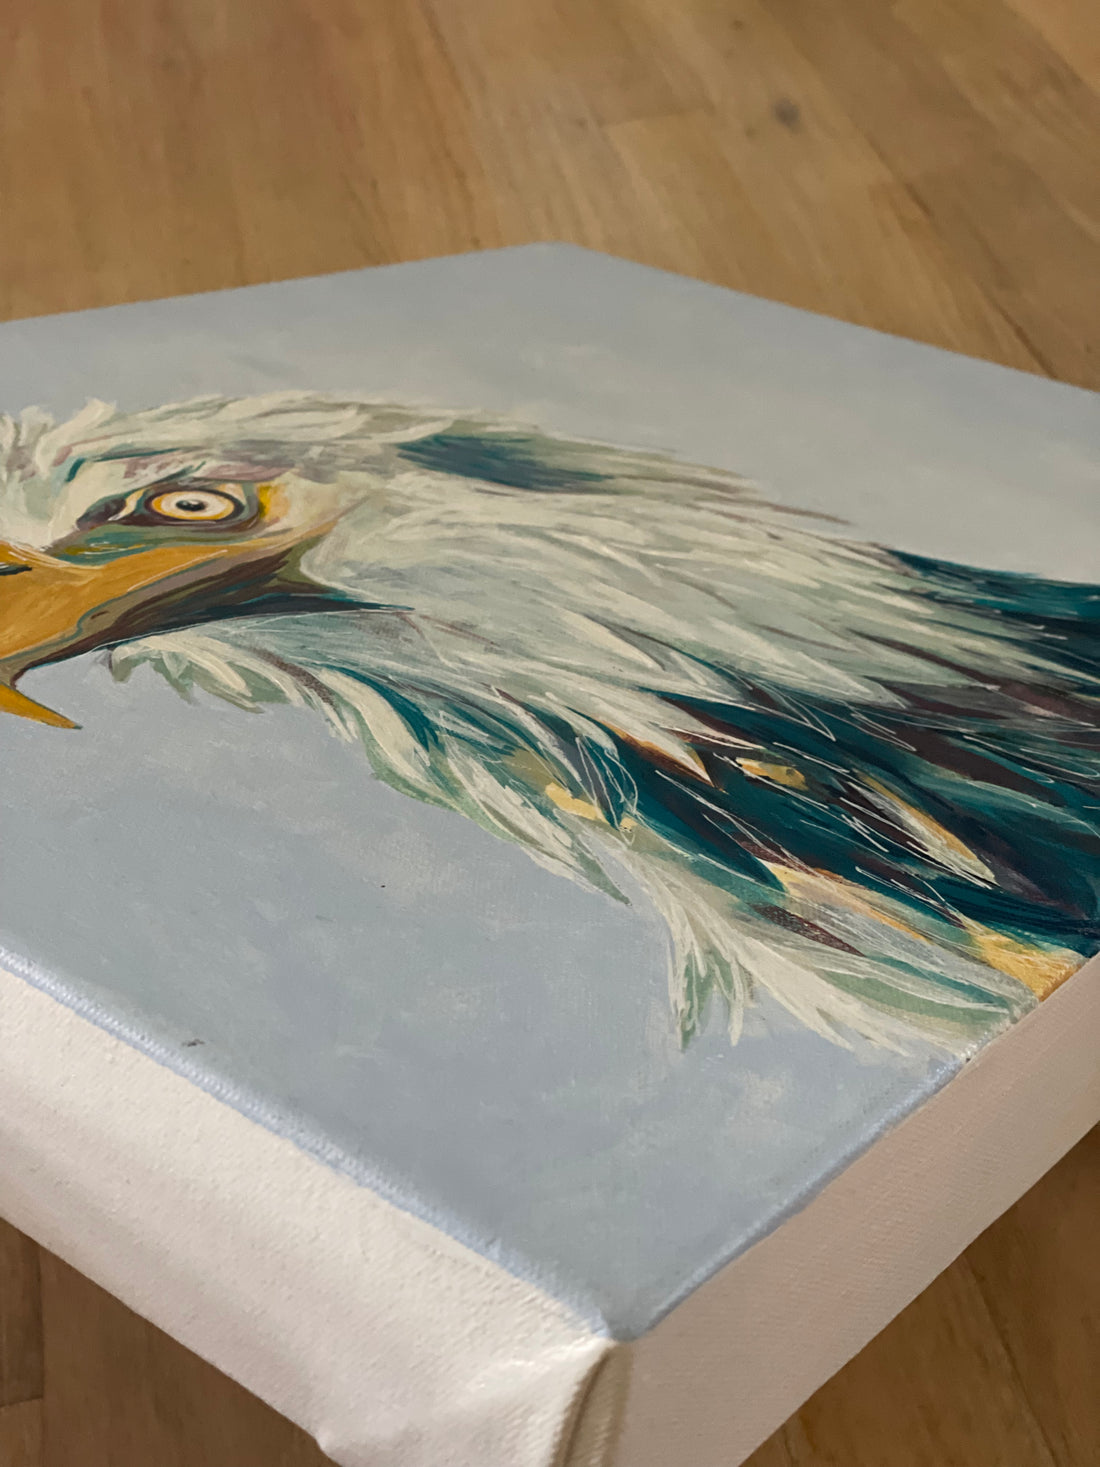 The Vision of the Bald Eagle